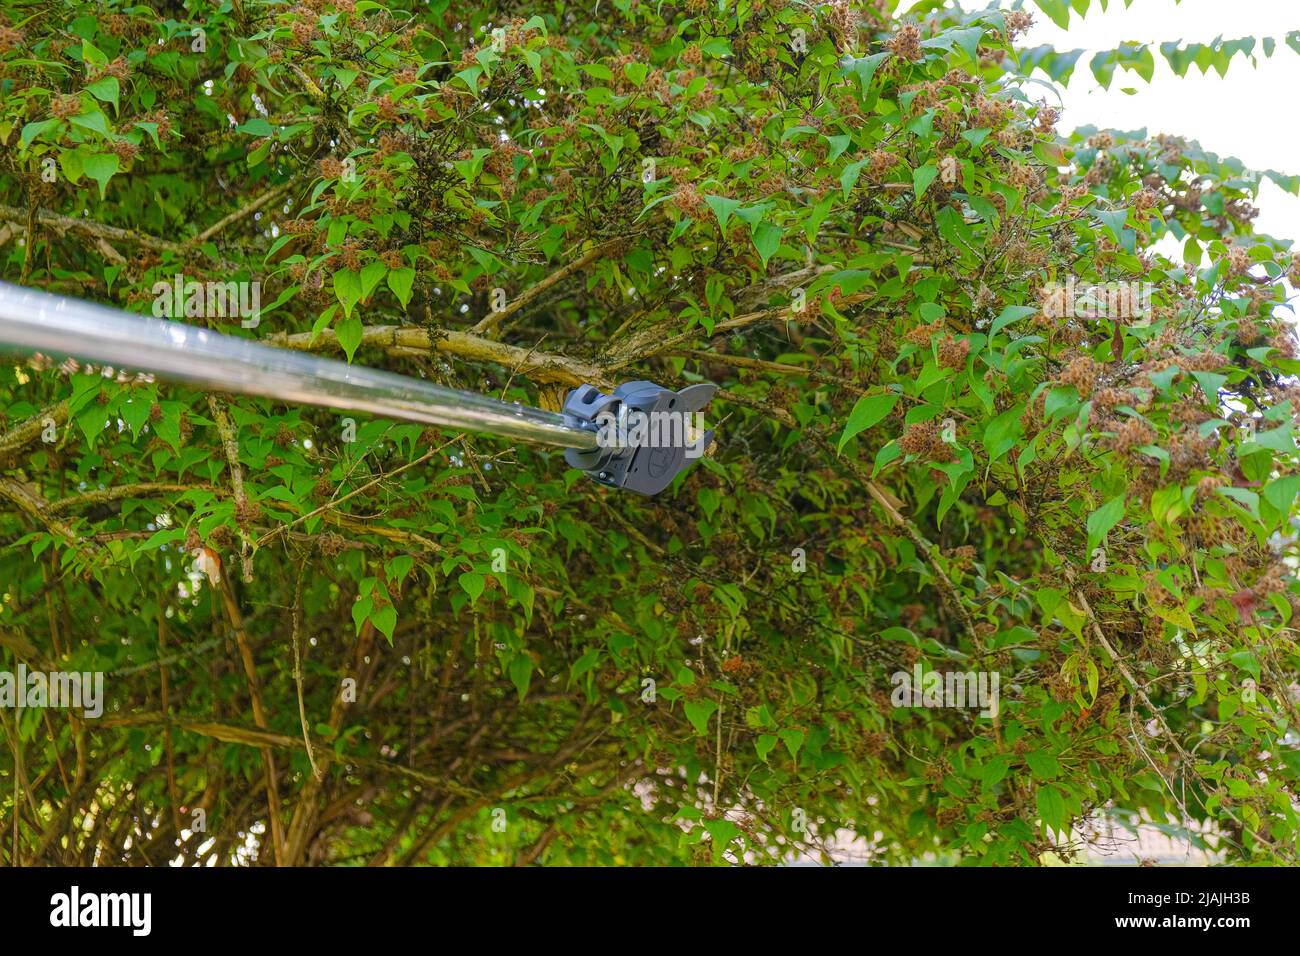 Telescopic garden shears cut branches .telescopic pruner for pruning branches. Pruning Tool.Gardening and farming tools.plant formation  Stock Photo